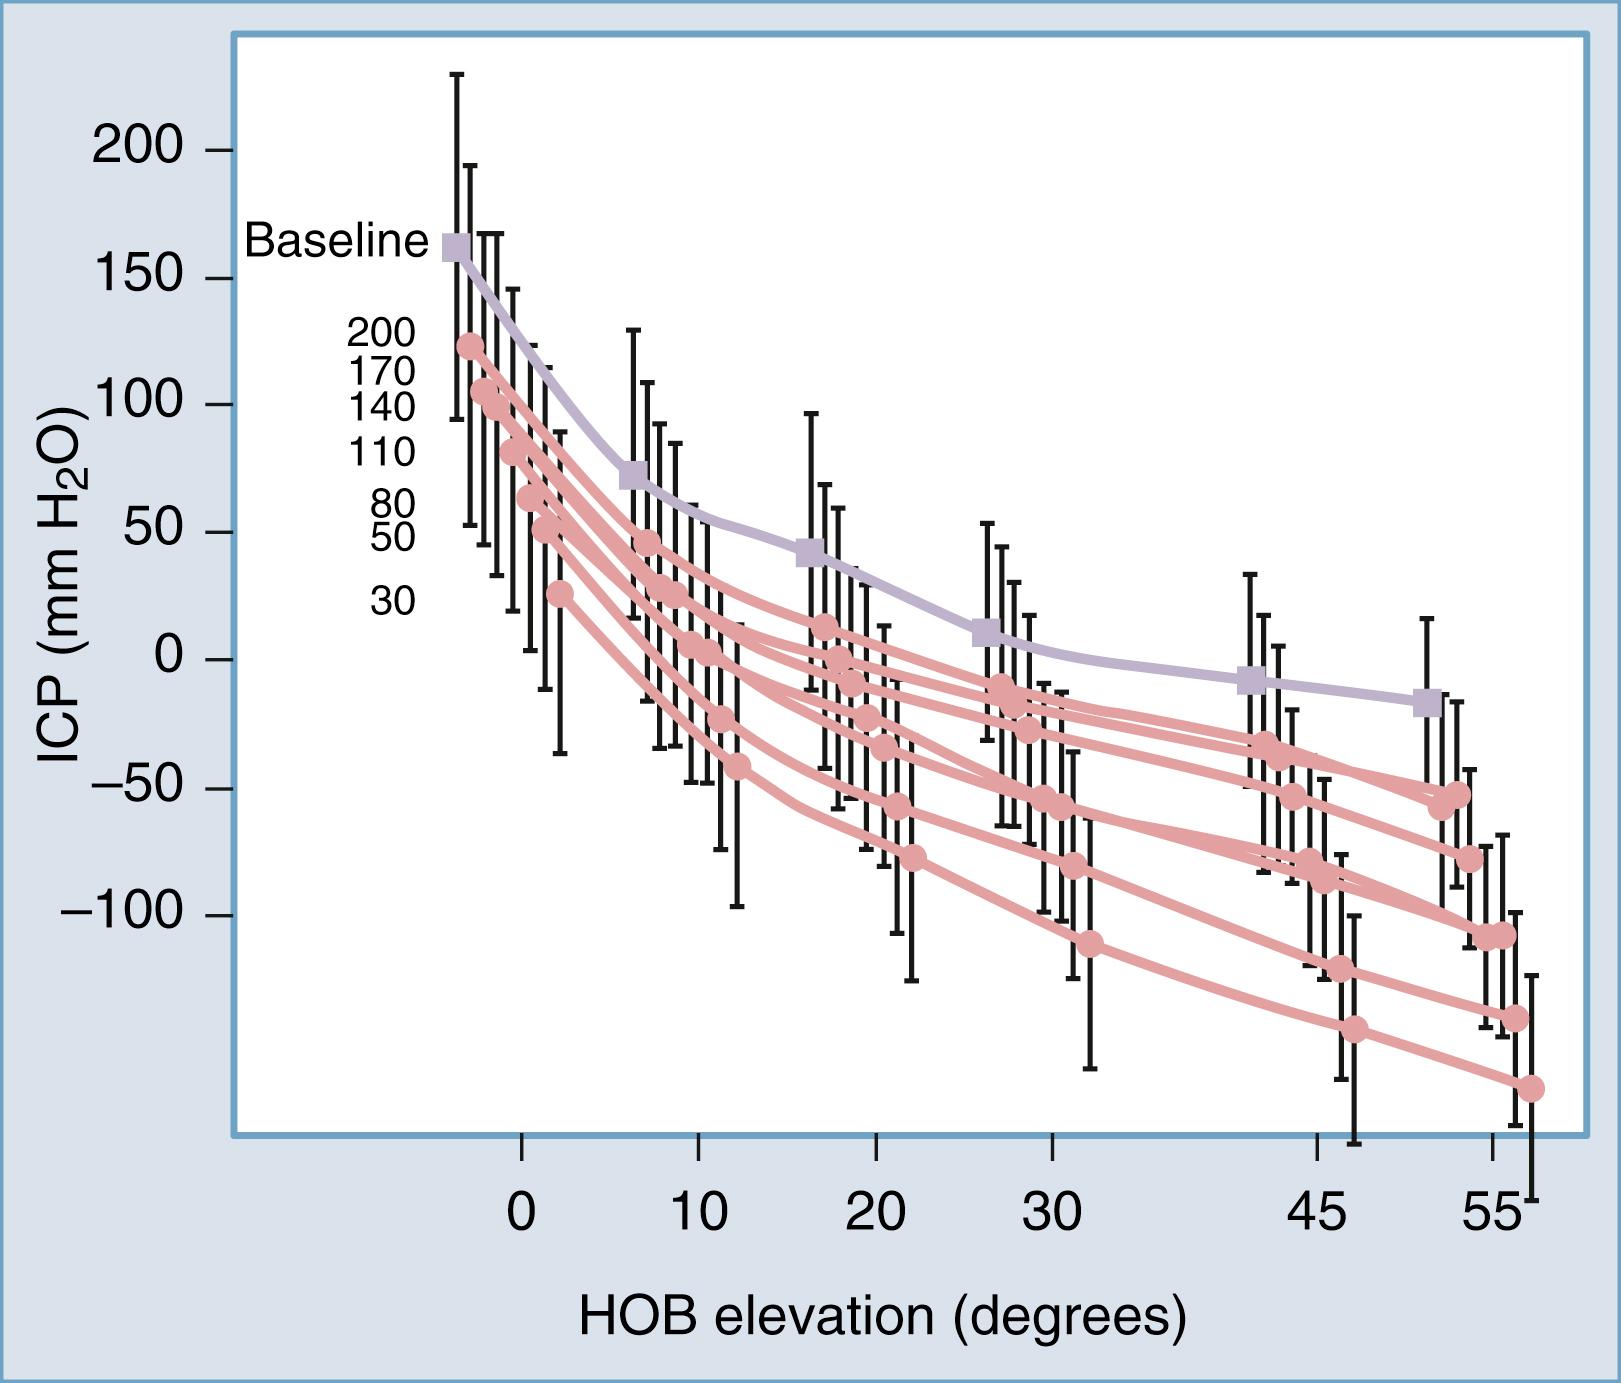 Figure 44.3, Intracranial pressure (ICP) (mean ± standard deviation) versus head-of-bed (HOB) elevation curves through the full range of differential-pressure valve opening pressures (200, 170, 140, and so on) measured from idiopathic normal-pressure hydrocephalus (iNPH) patients treated with a ventriculoperitoneal shunt.